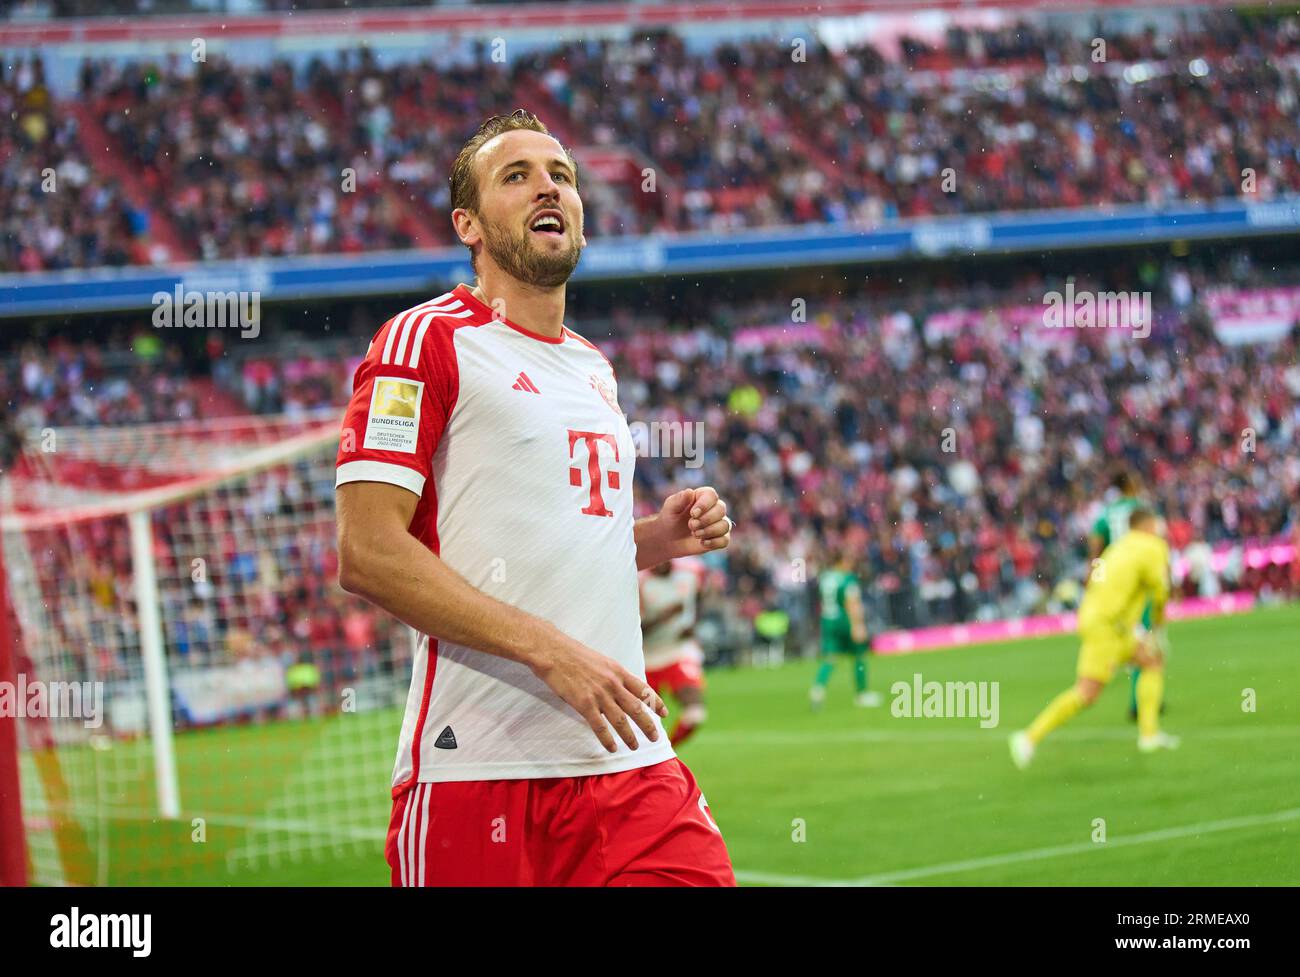 Harry Kane, FCB 9   scores, shoots 2-0 goal 11m celebrates his goal, happy, laugh, celebration,   in the match  FC BAYERN MUENCHEN - FC AUGSBURG 3-1  on Aug 27, 2023 in Munich, Germany. Season 2023/2024, 1.Bundesliga, FCB, München, matchday 3, 3.Spieltag © Peter Schatz / Alamy Live News    - DFL REGULATIONS PROHIBIT ANY USE OF PHOTOGRAPHS as IMAGE SEQUENCES and/or QUASI-VIDEO - Stock Photo